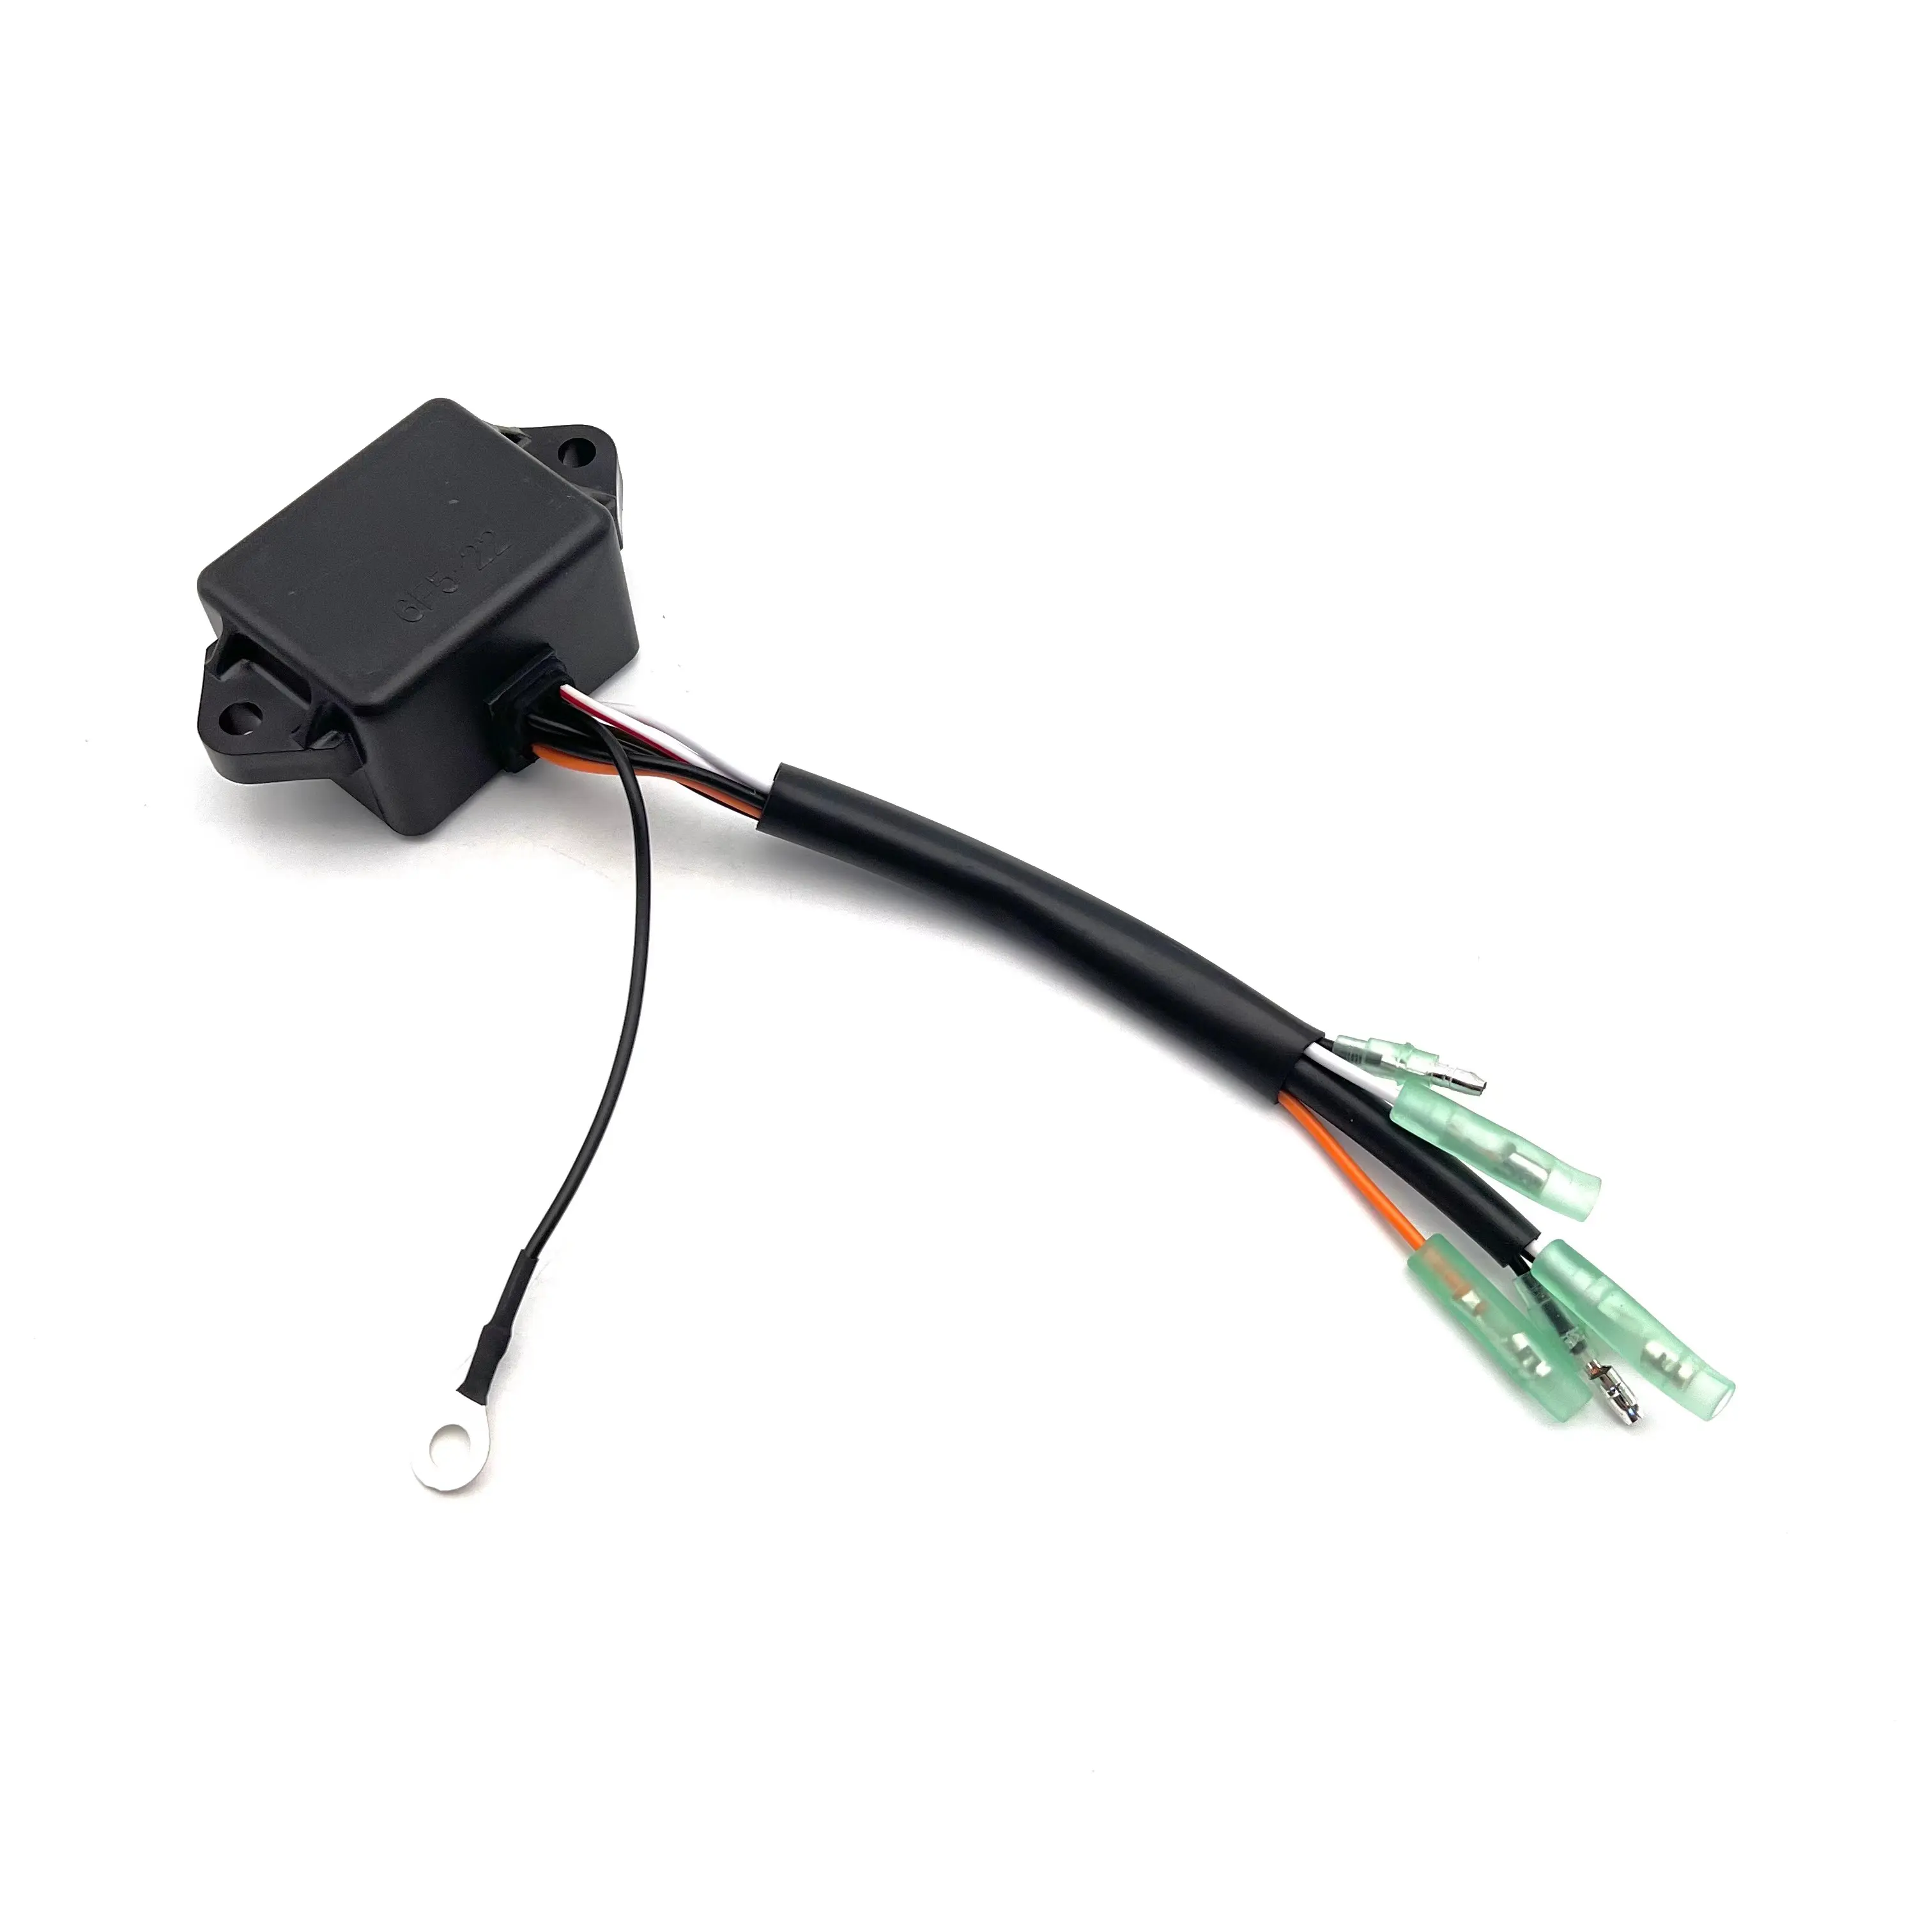 6F5-85540-21-00 6F5-85540-22-00 Boat Outbroard Motor Engine Parts CDI Ignition Unit for Yamaha 9.9HP 15 25 30 40HP E40 40J